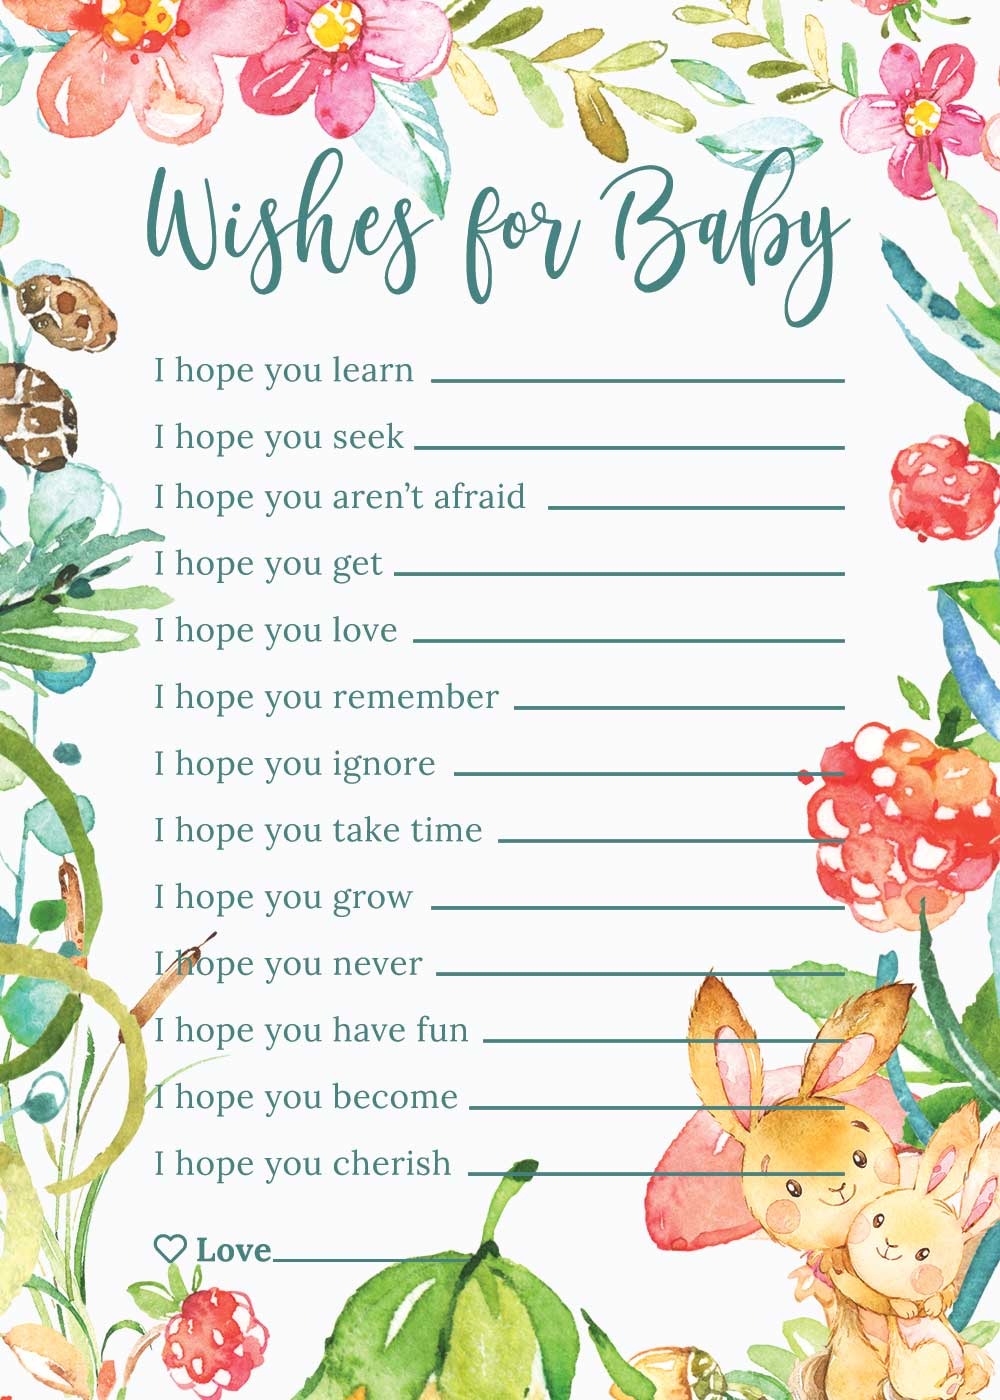 Baby Shower Wishes for baby card - Raspberry Theme